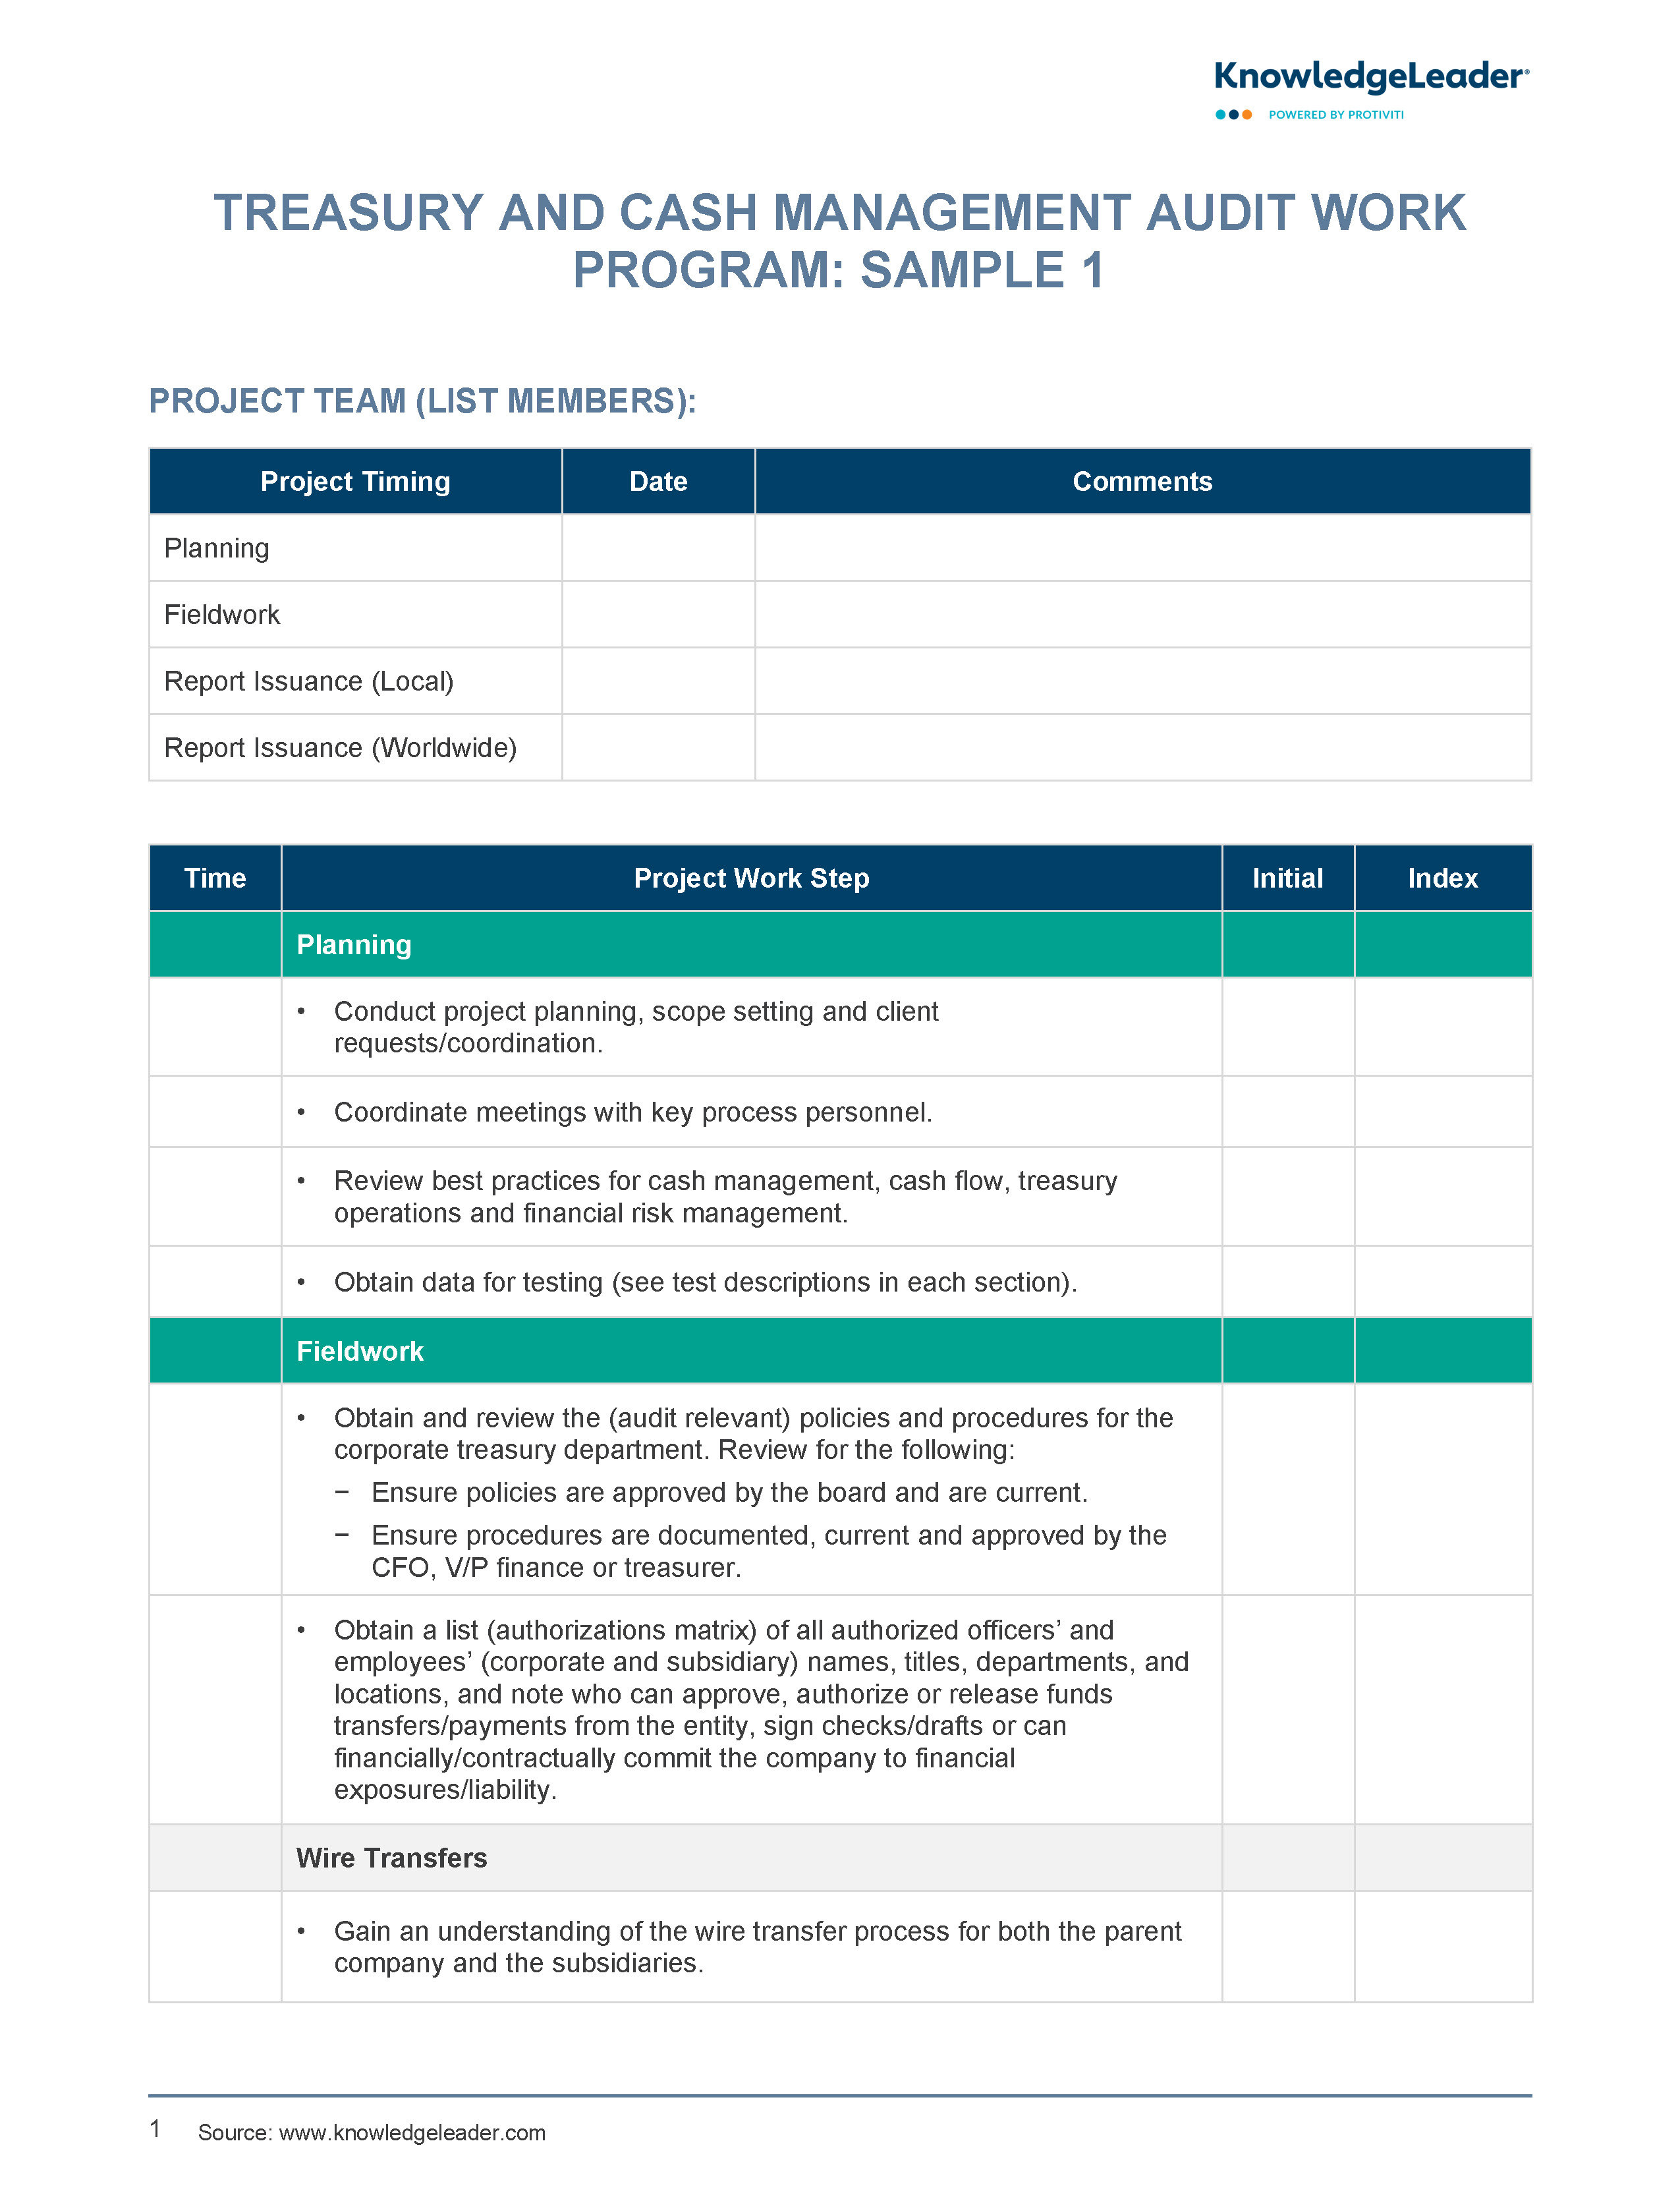 Screenshot of the first page of Treasury and Cash Management Work Program